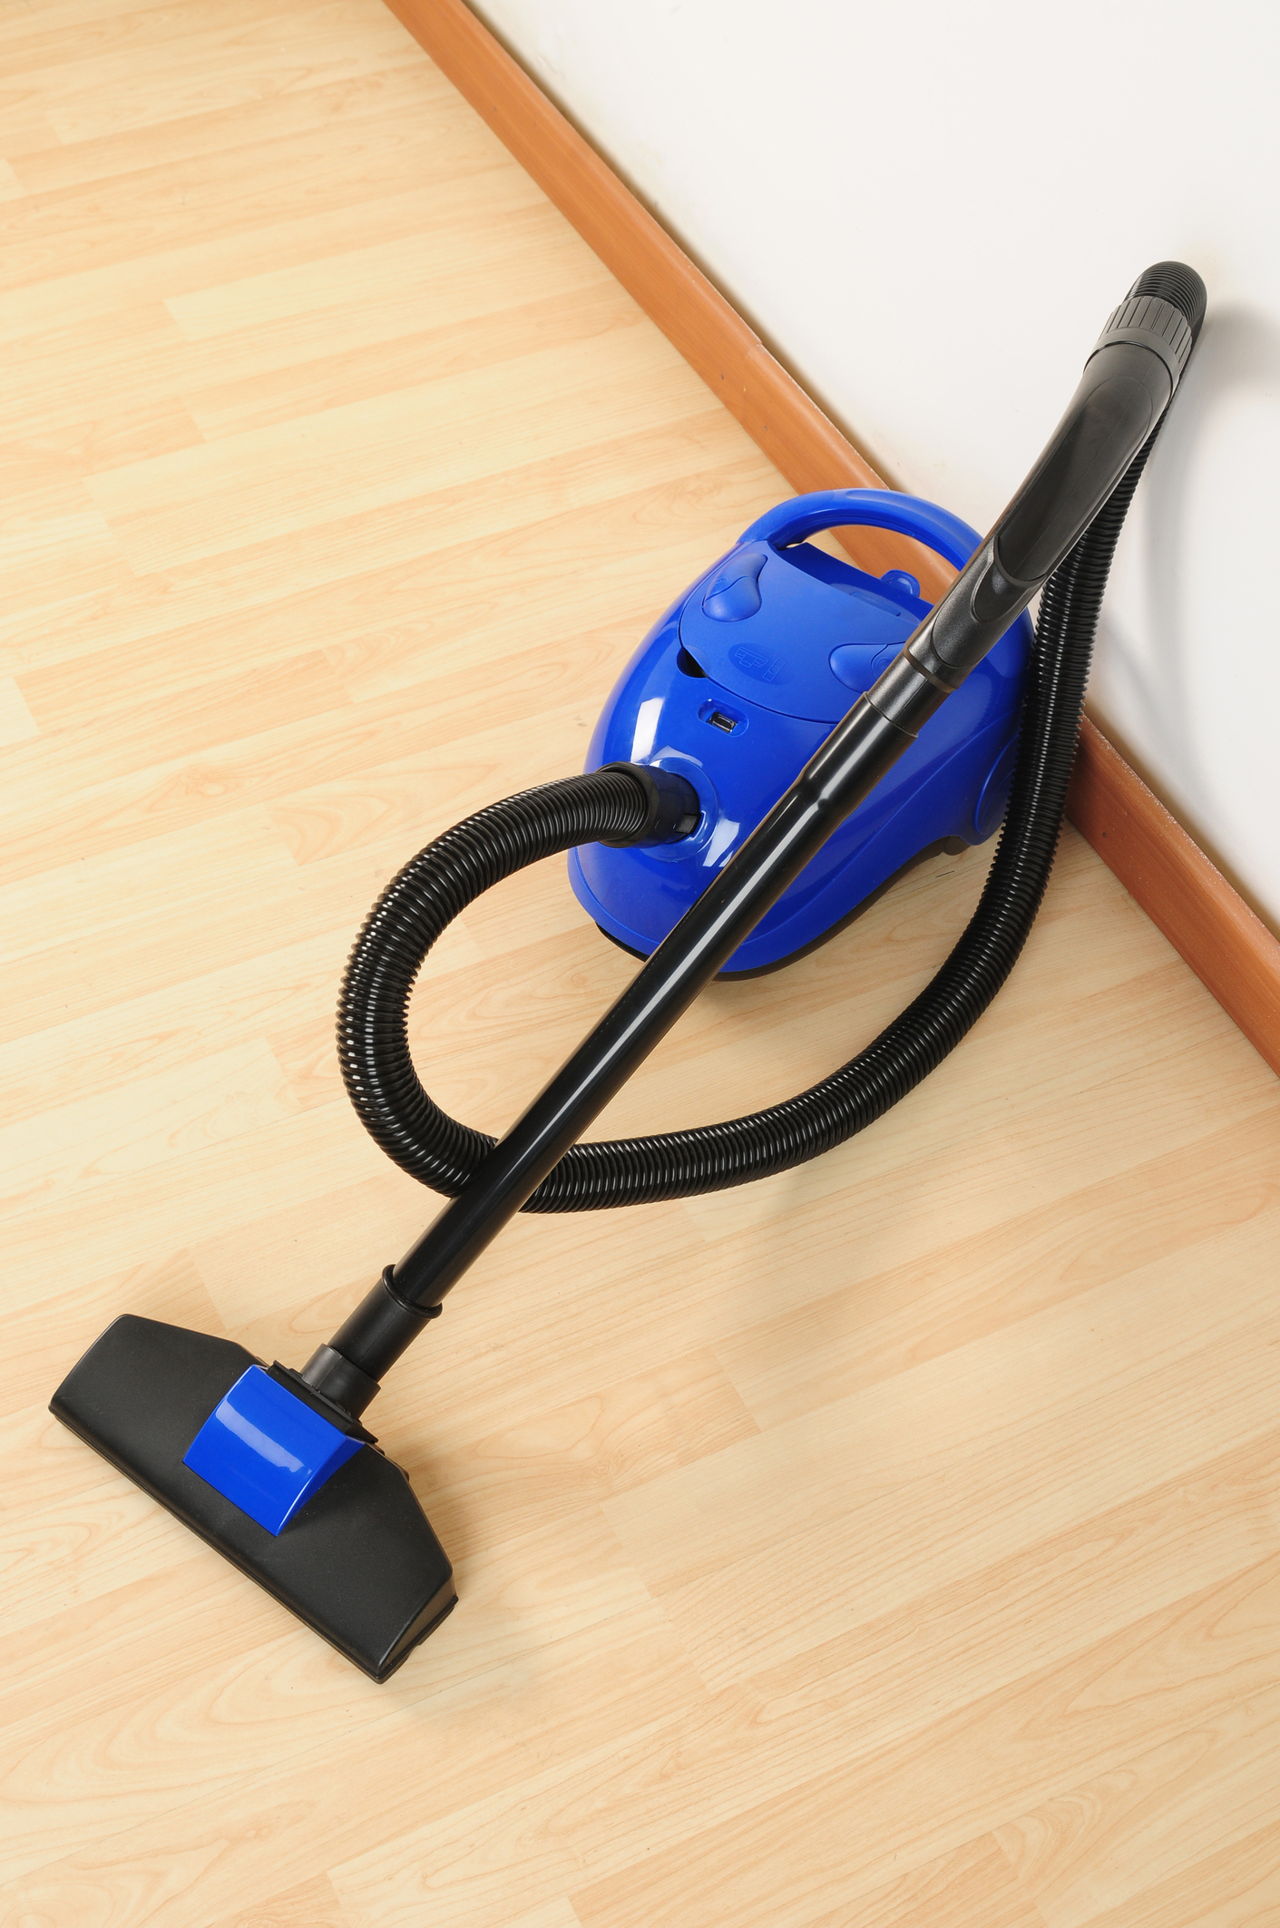 Clean Laminate Floors Without Streaking, How To Wash Laminate Floors Without Streaks